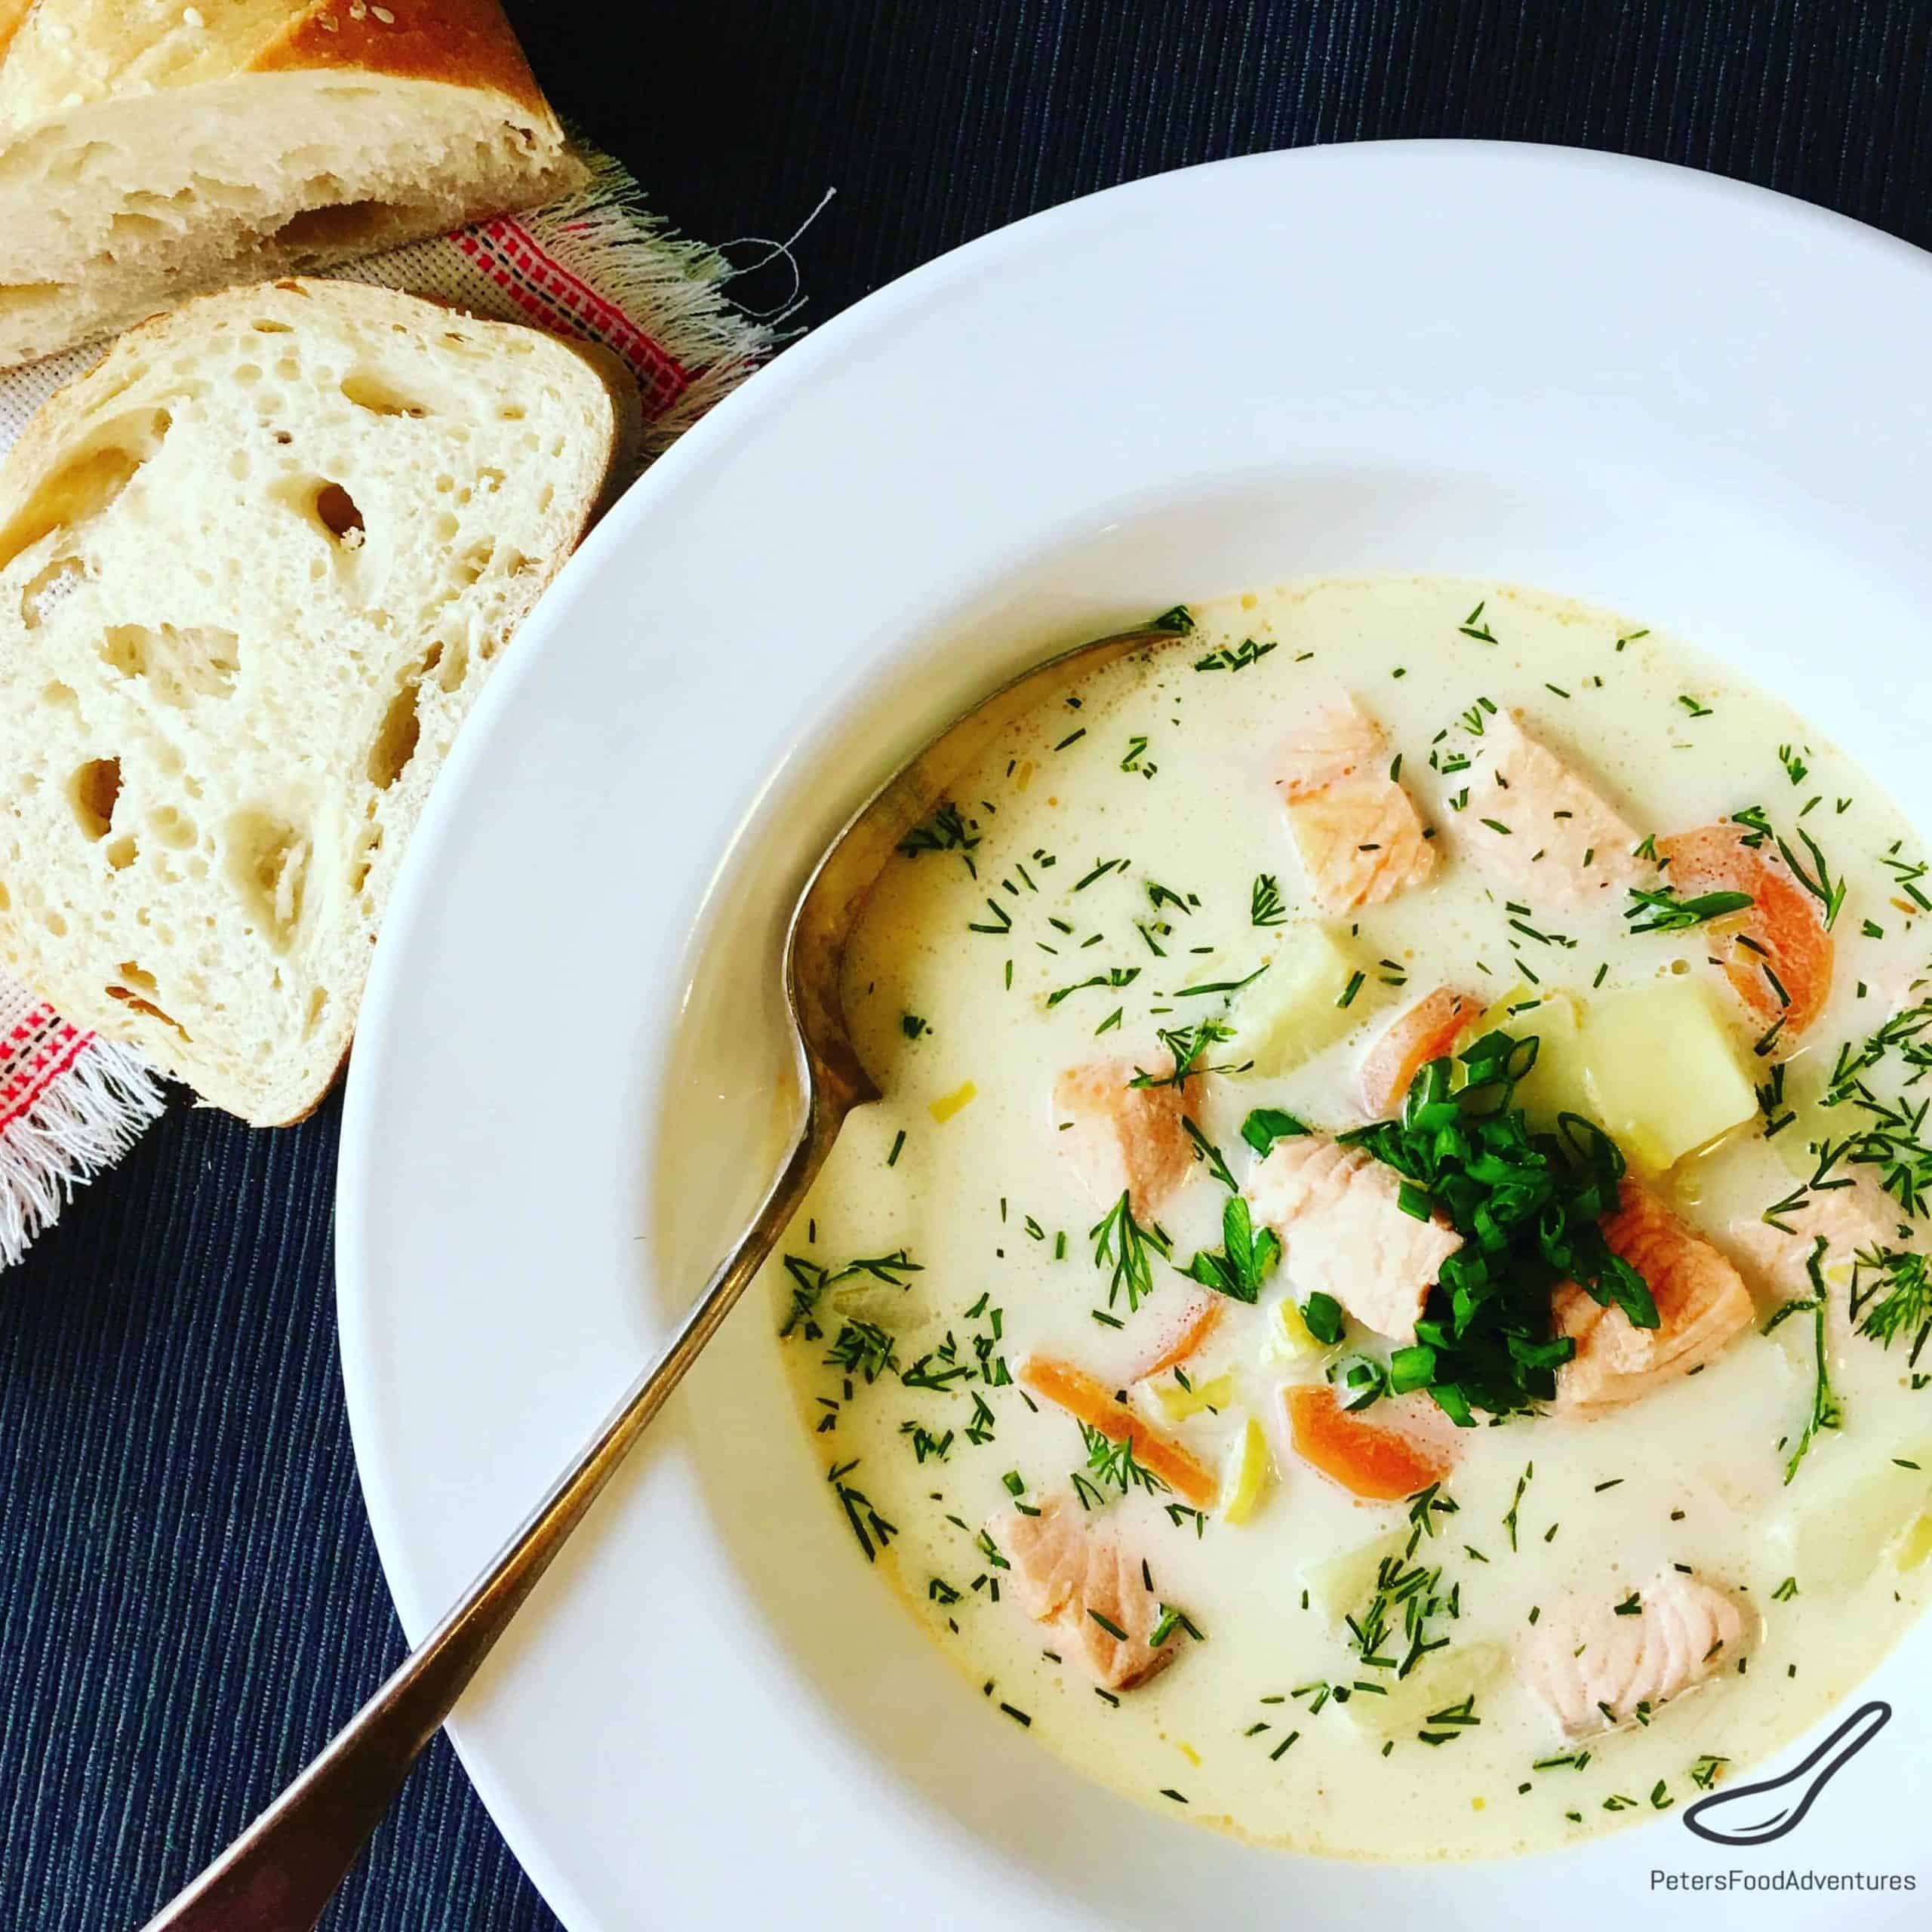 A Creamy Fish Soup made with Salmon and Potatoes (Ukha). Real Fish Broth made with fish heads. Lohikeitto - Finnish Salmon Soup (Финская уха)